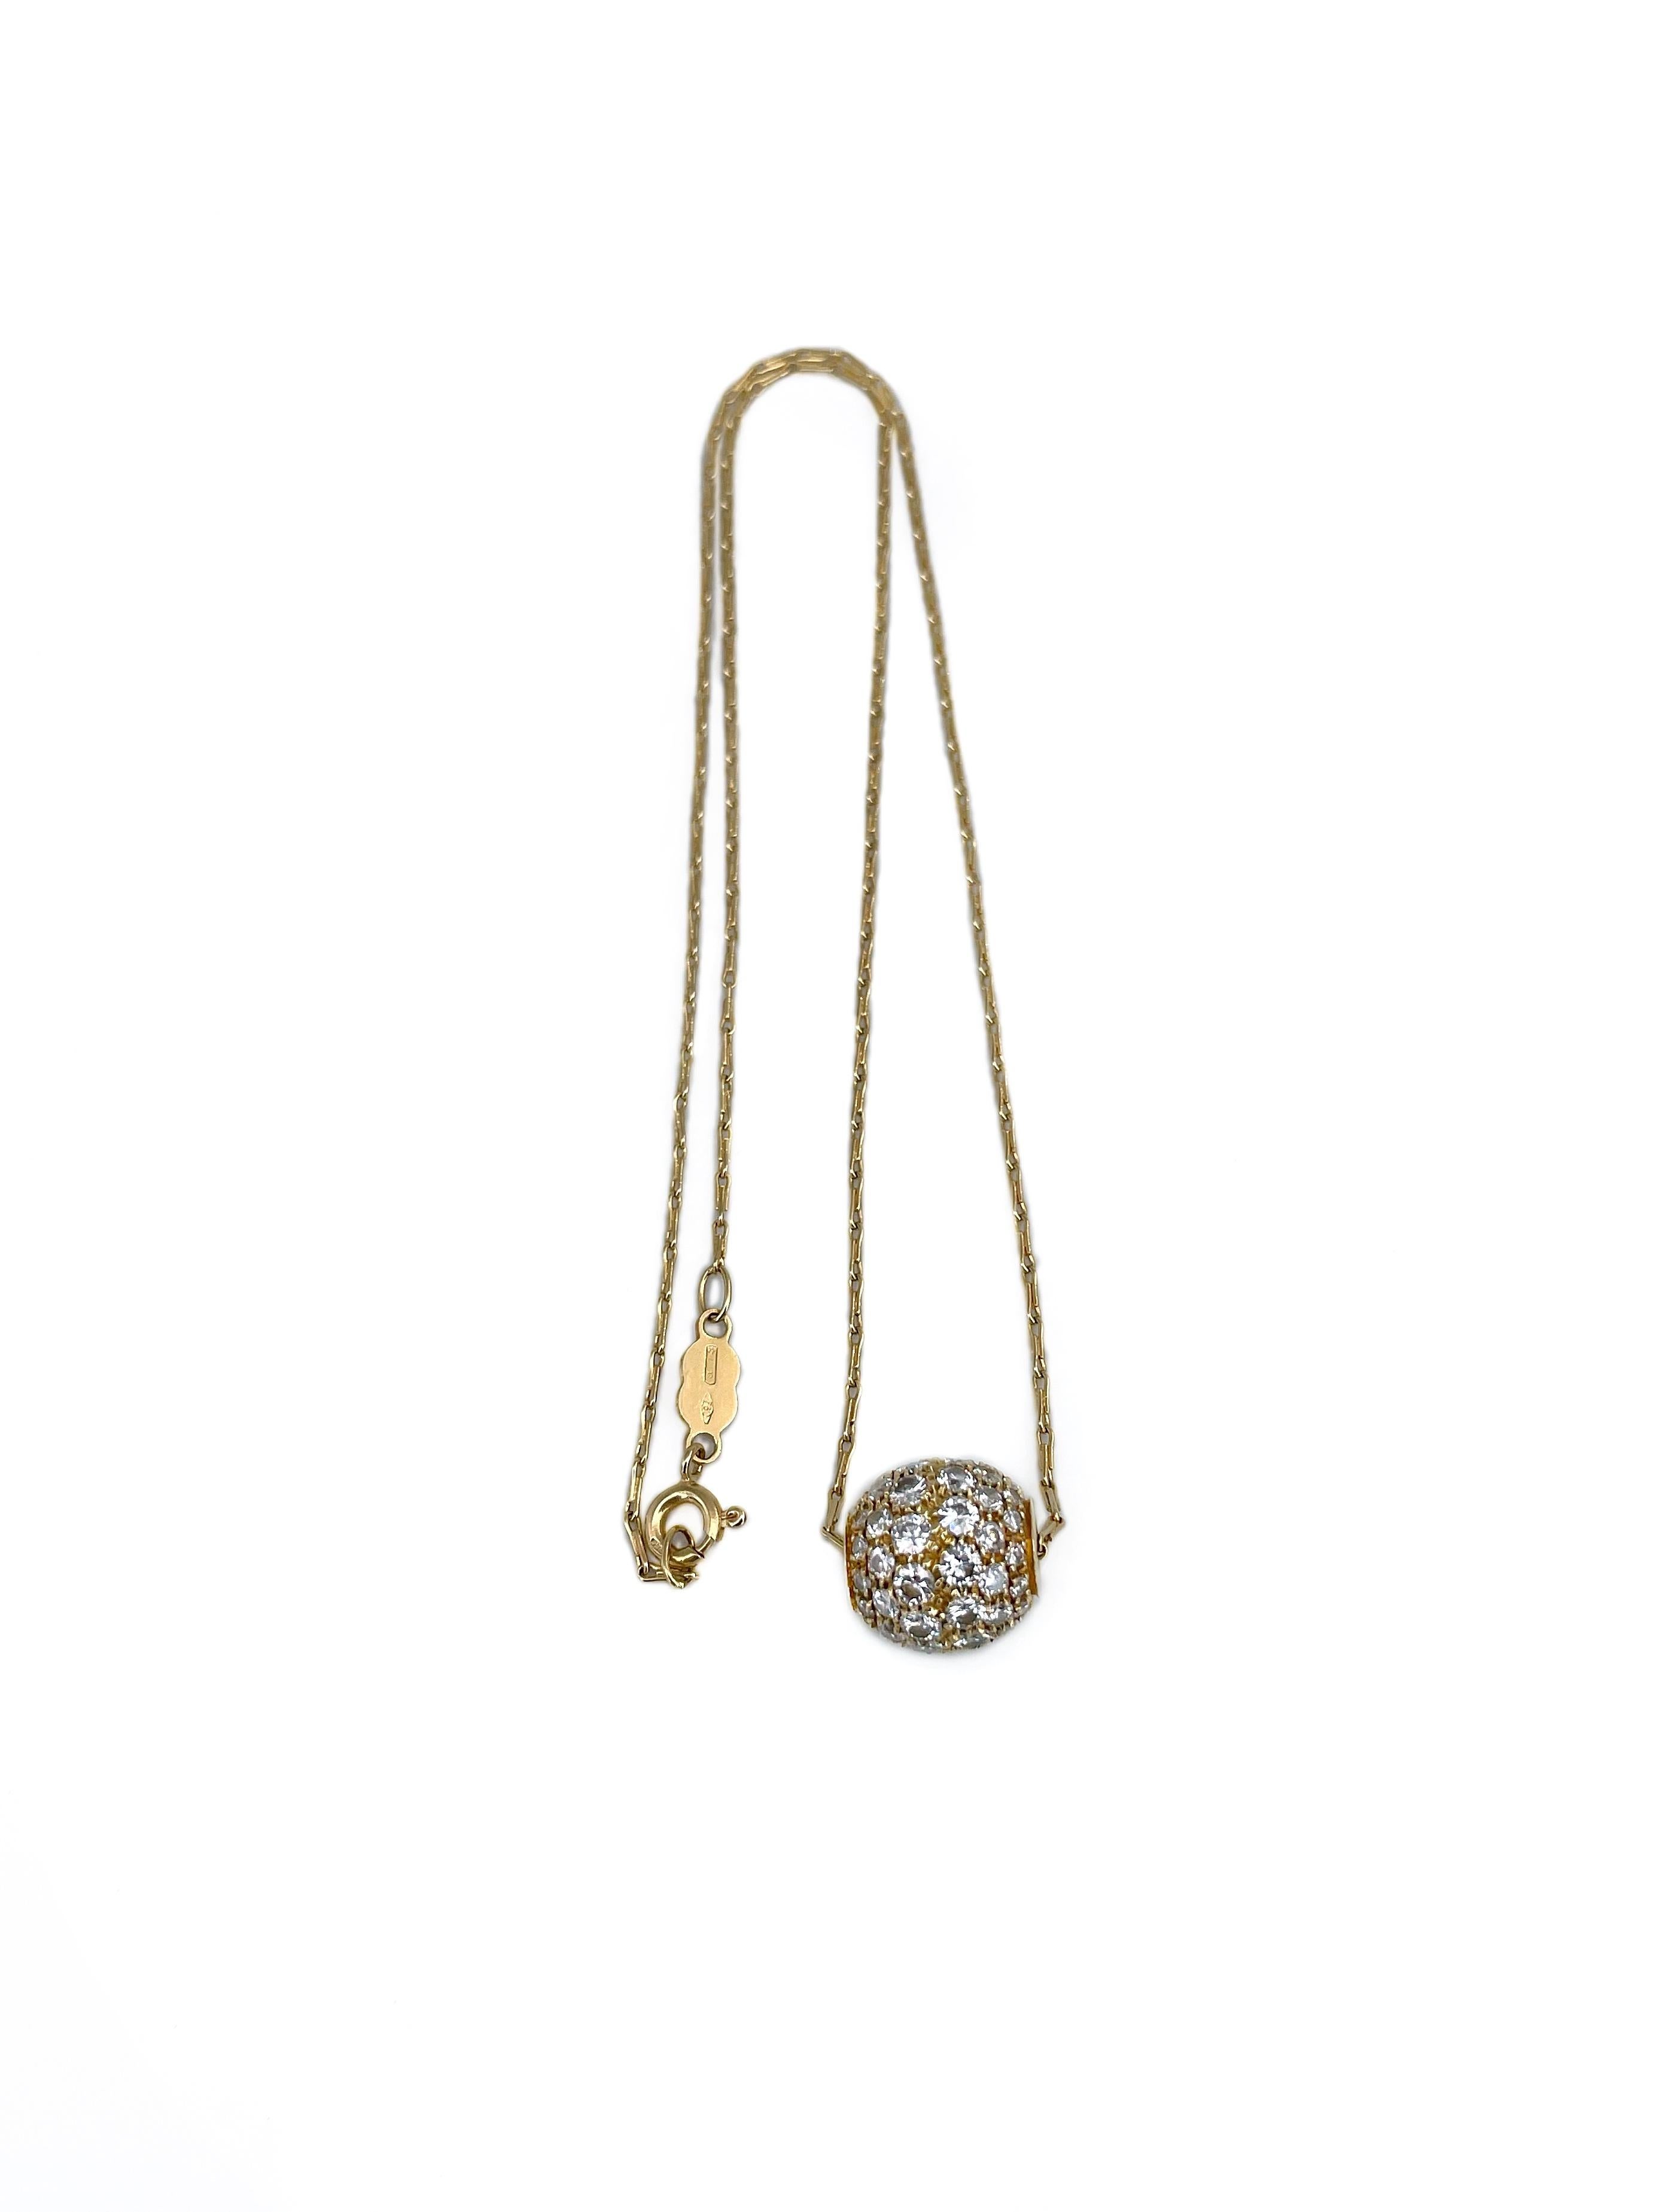 It is a stylish ball pendant with a chain designed by Italian jewelry brand “Unoaerre” in 2000s. It is crafted in 18K yellow gold. The piece features 72 round brilliant  cut diamonds: TW 2.40ct, RW+/W, VS-SI.

Signed (shown in photos).

Weight: